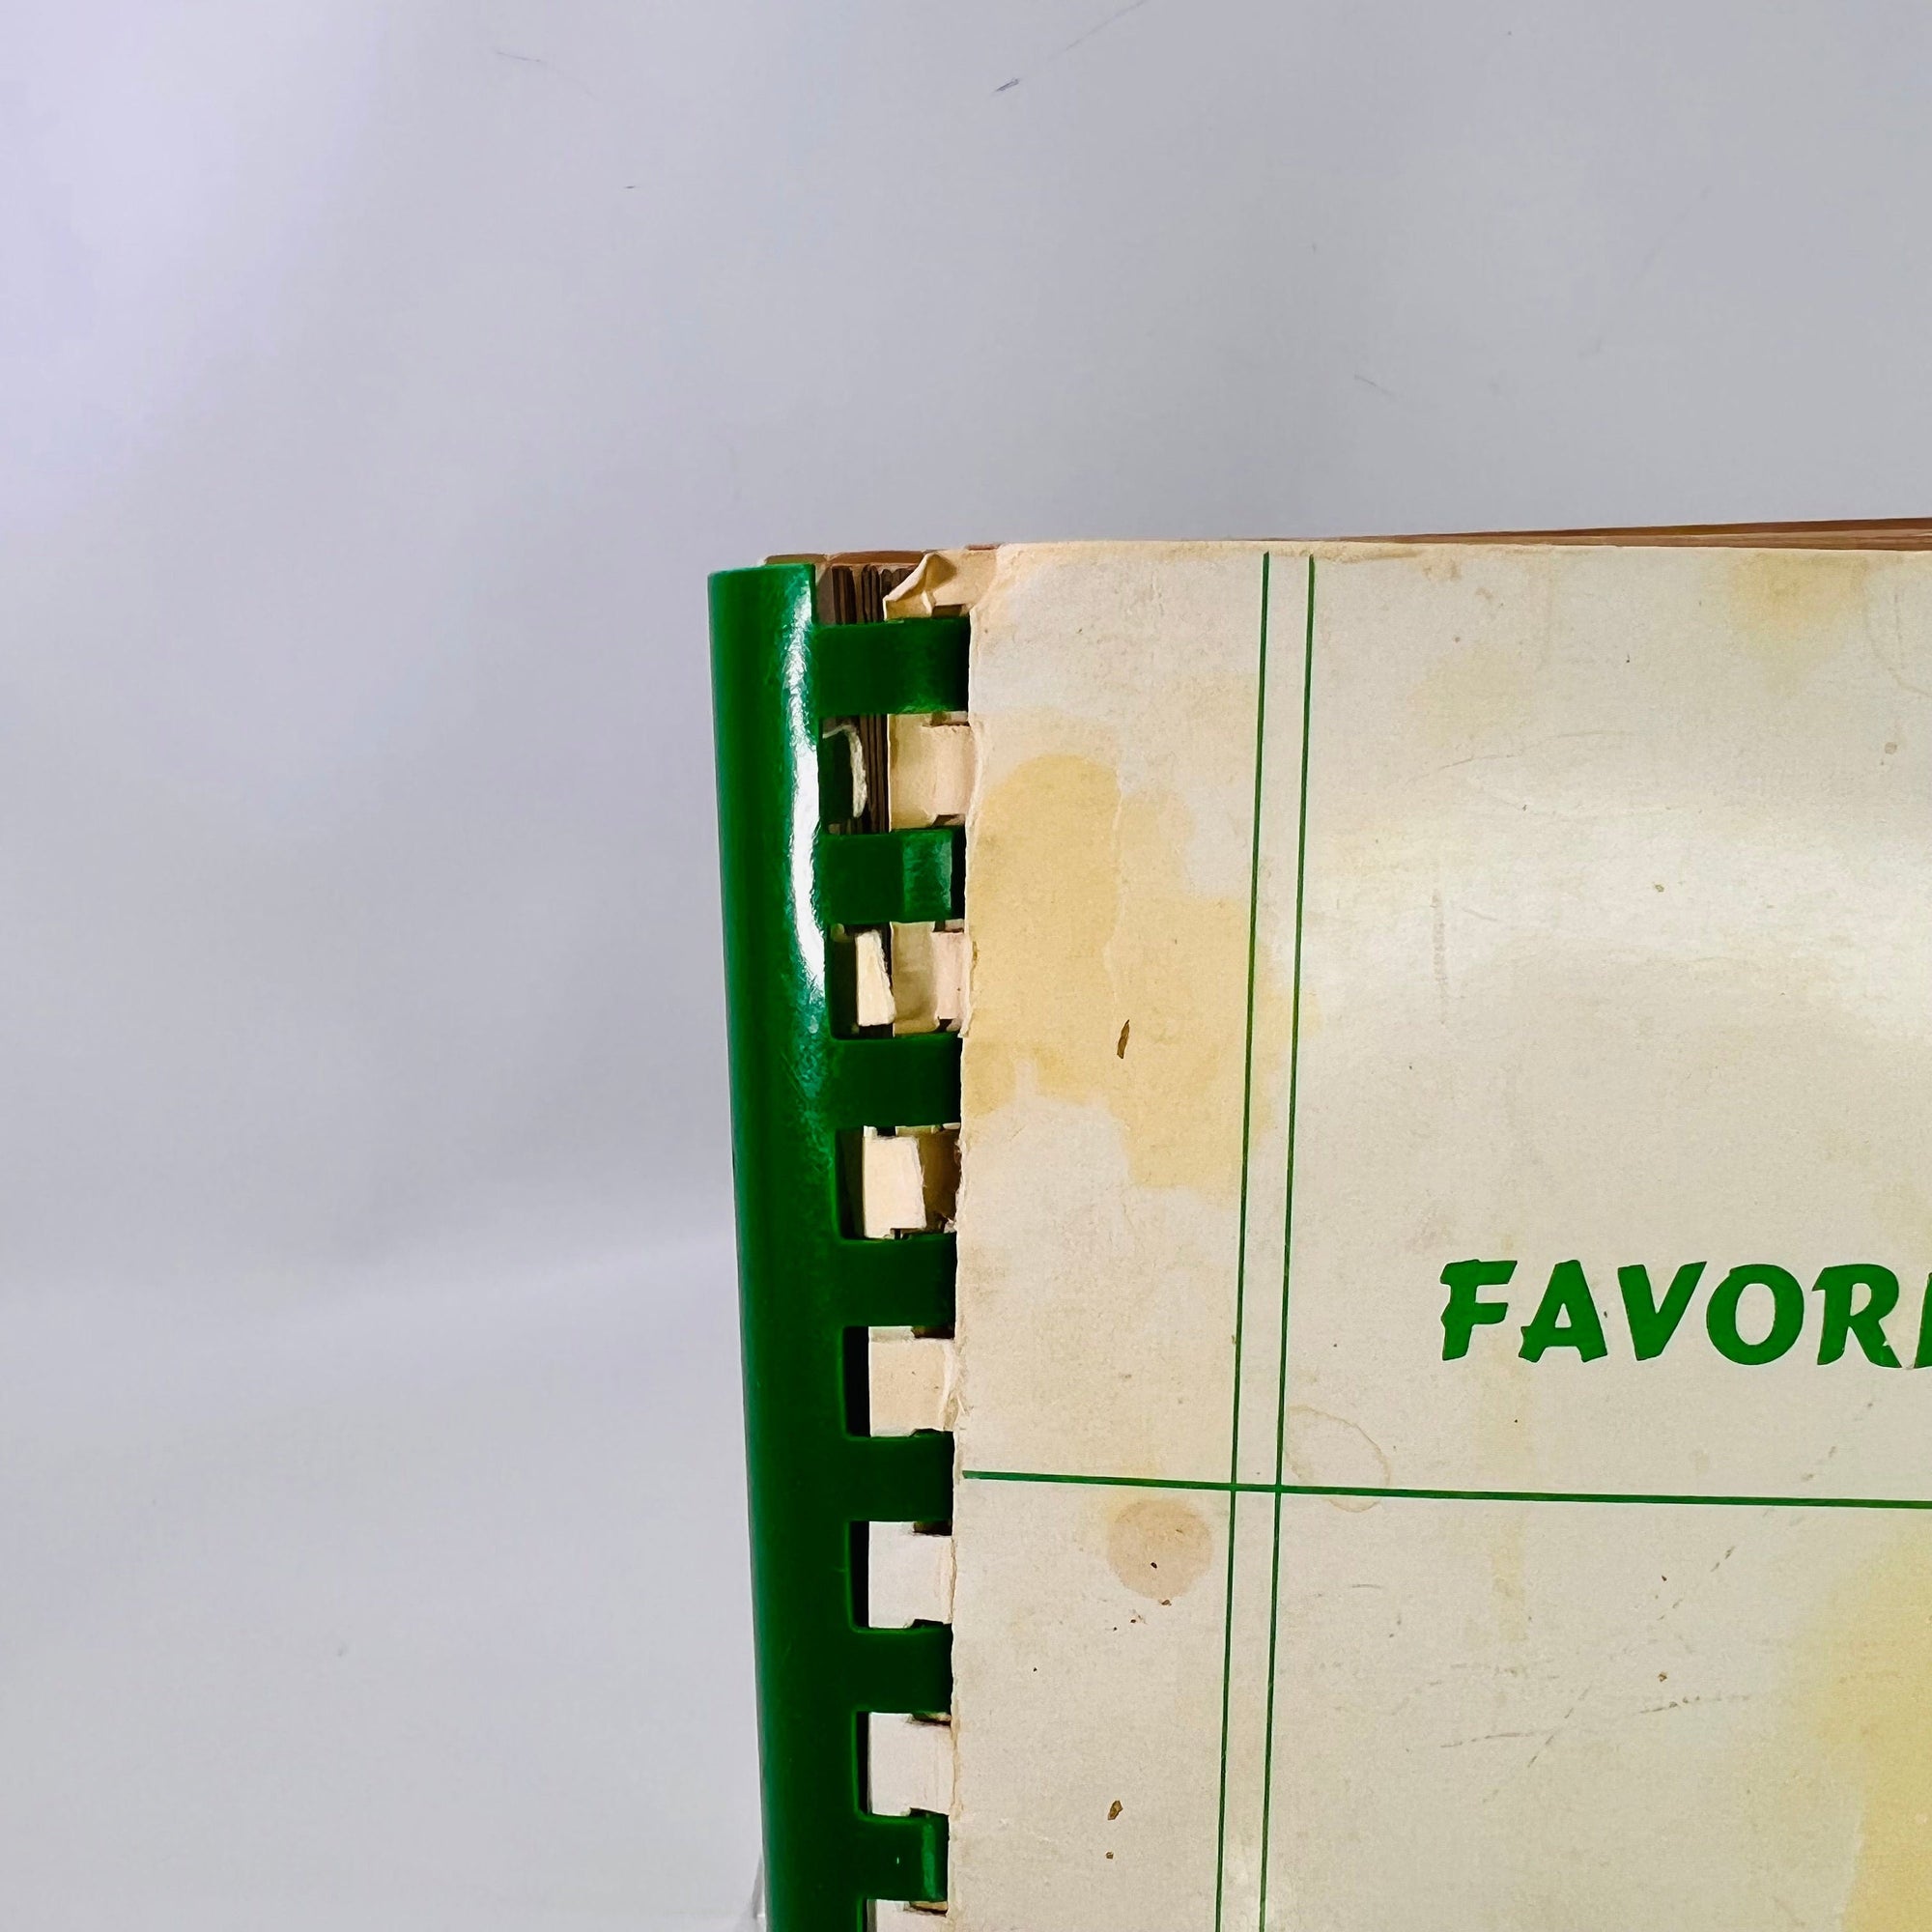 Favorite Foods and Favorite Foods Two compiled by Lutheran Children's Friend Auxiliary of Michigan 1974 Vintage Book